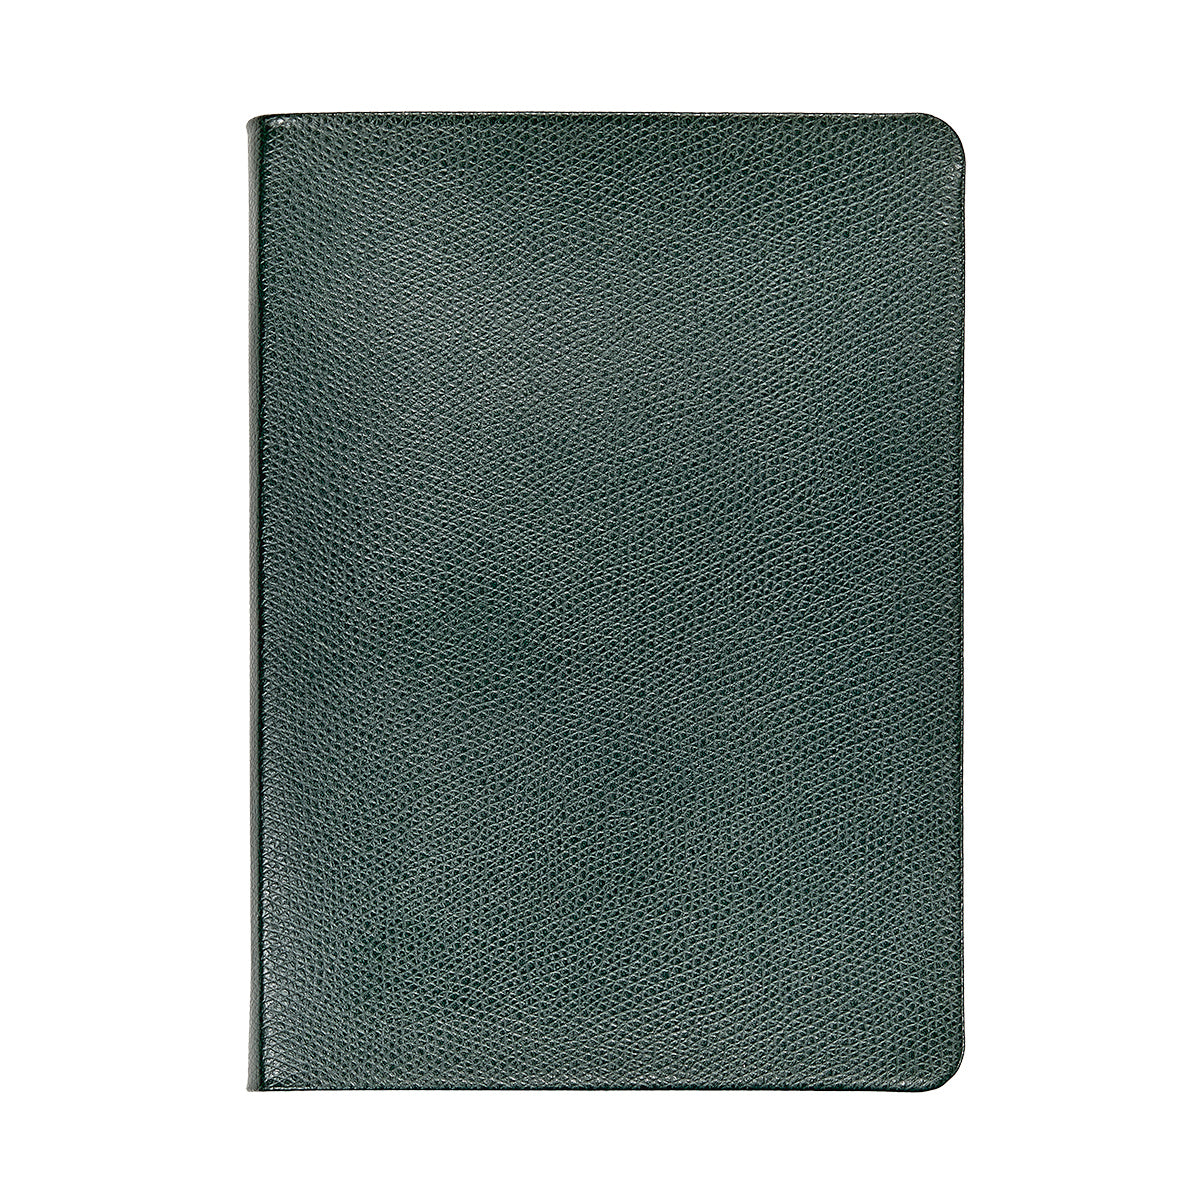 Graphic Image 7 X 5 Medium Travel Journal Green Embossed Leather